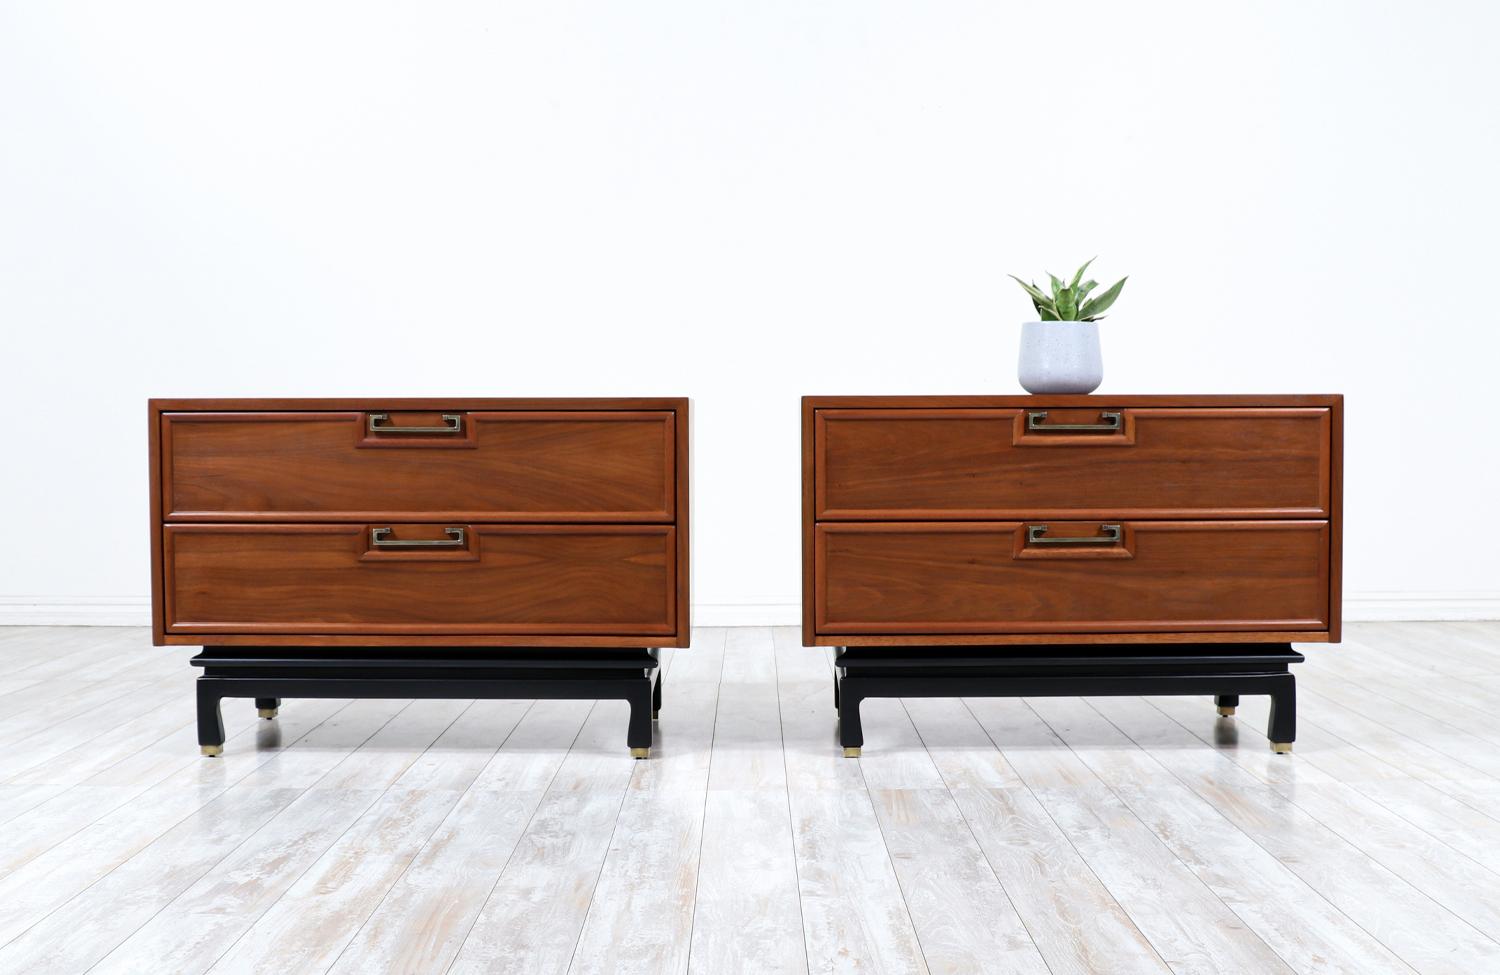 Mid-Century Modern walnut night stands with brass accents by American of Martinsville.

________________________________________

Transforming a piece of Mid-Century Modern furniture is like bringing history back to life, and we take this journey